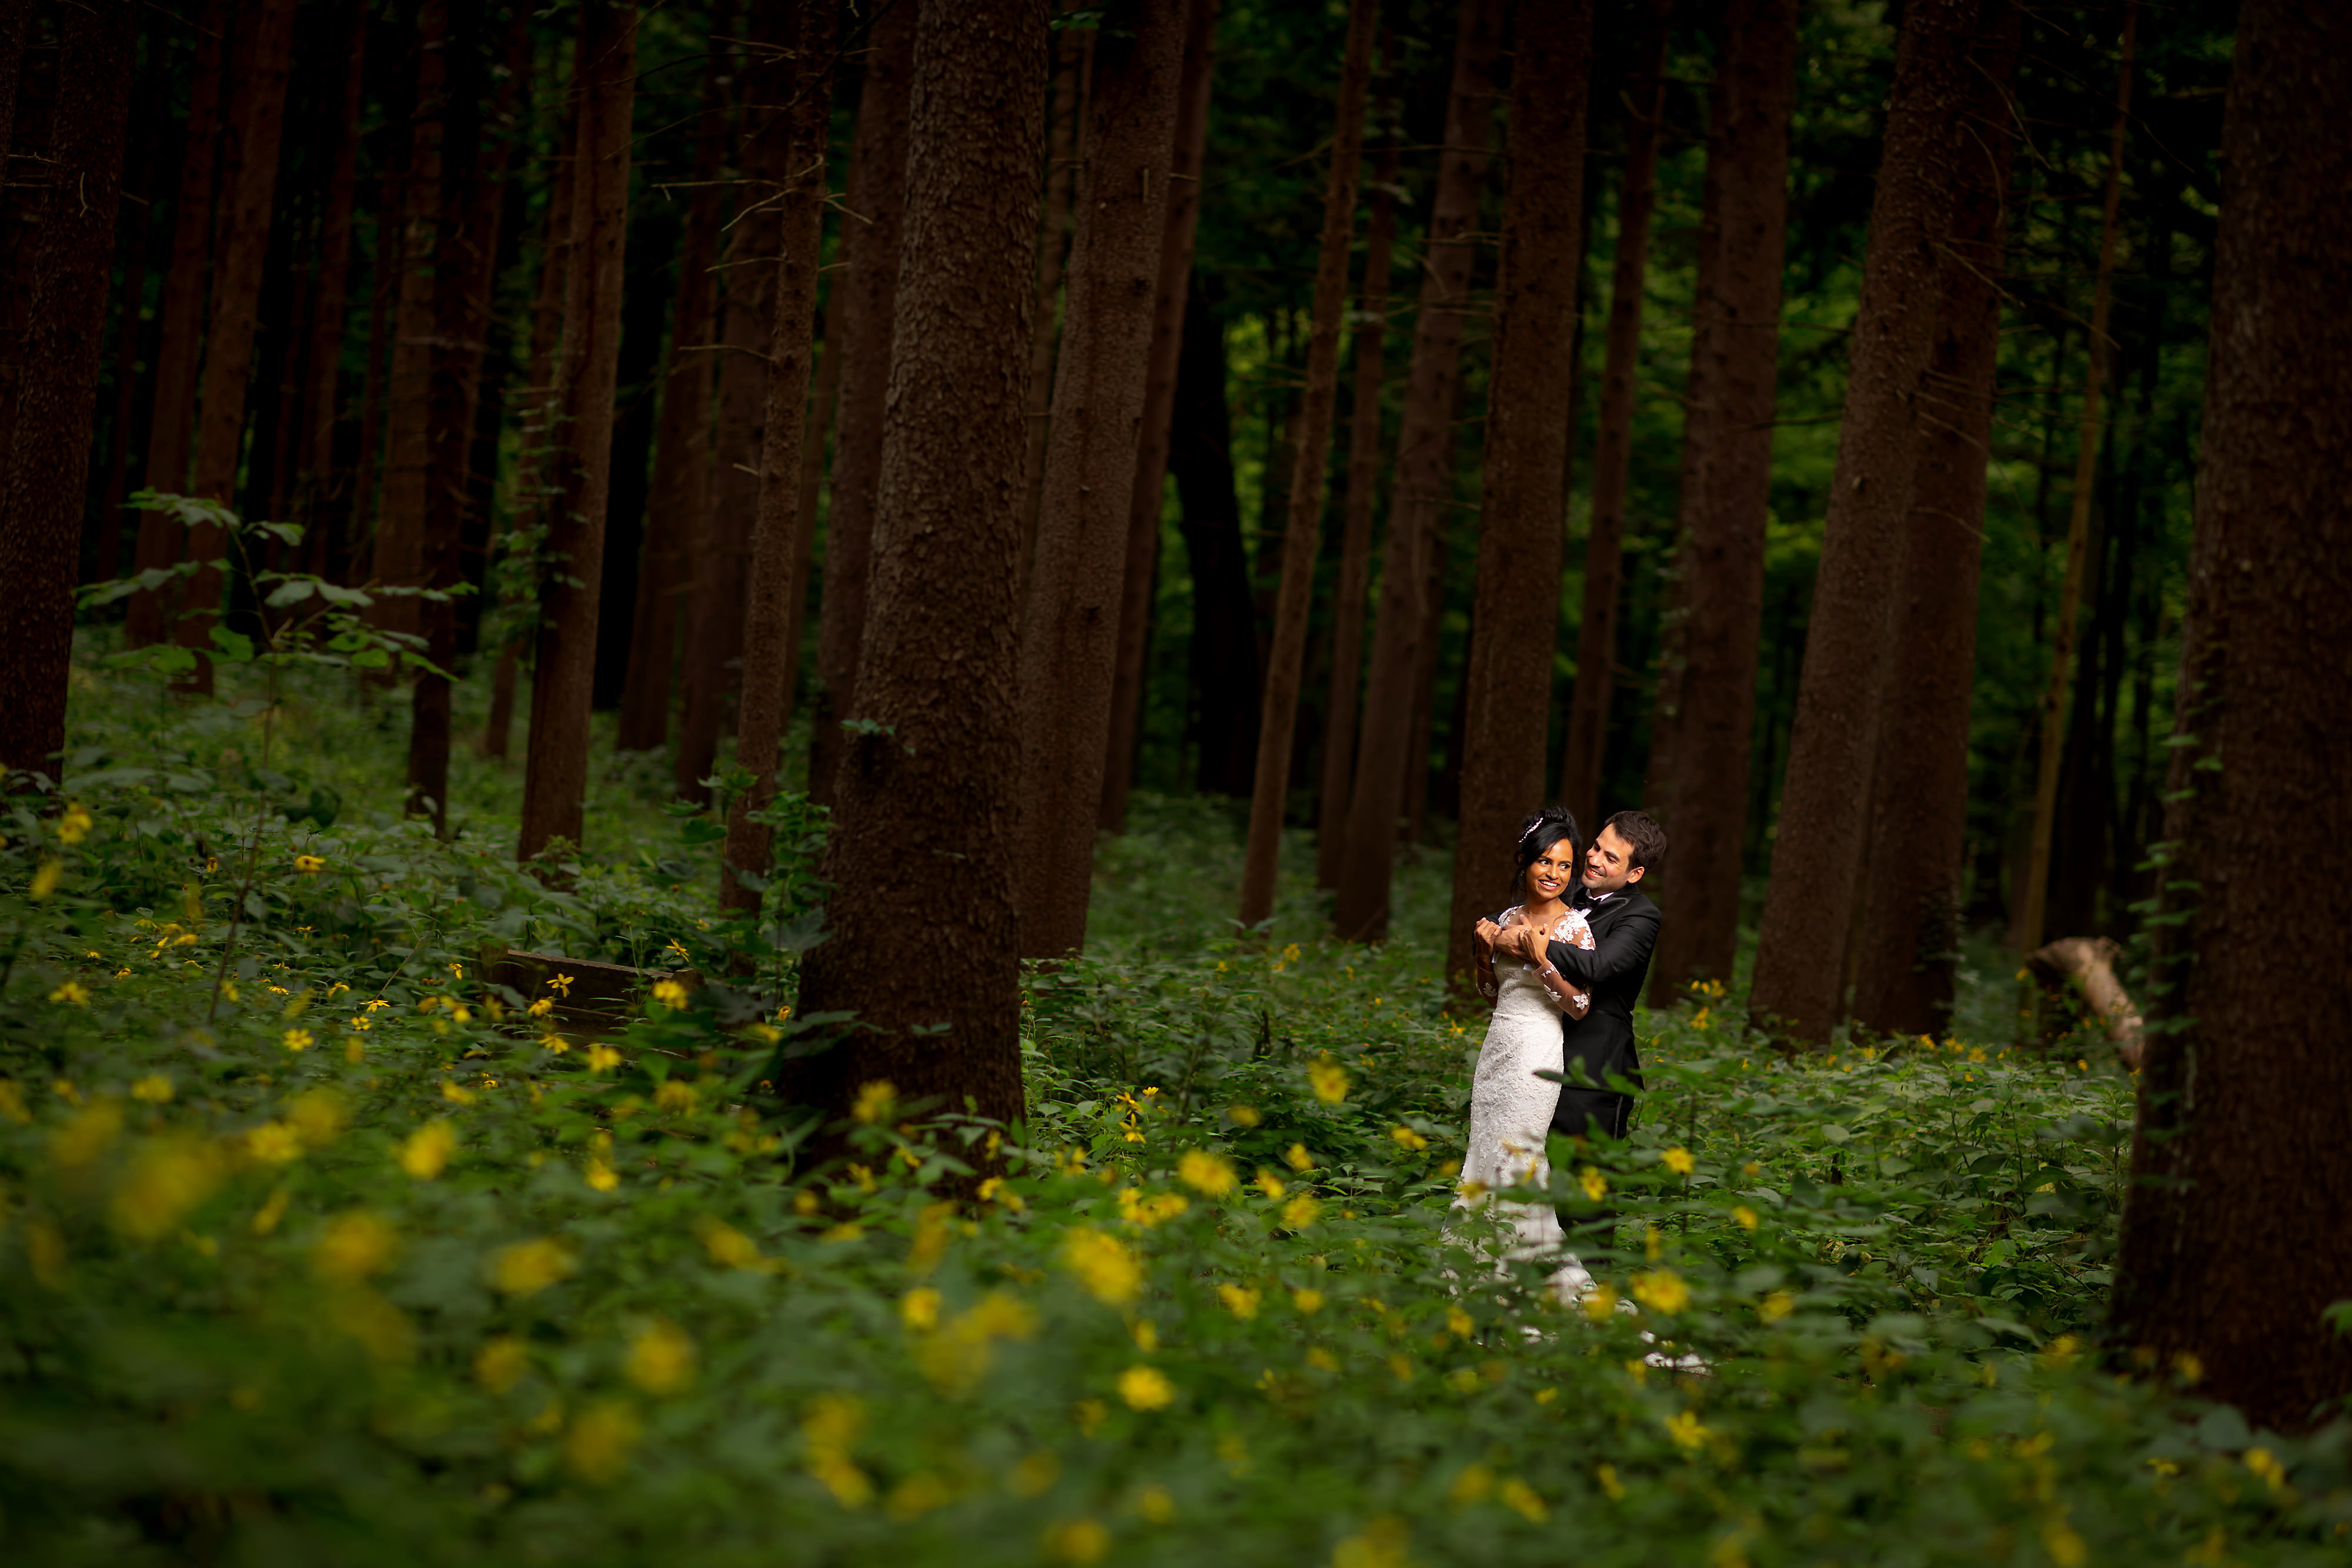 Wedding portrait of bride and groom at Morton Arboretum in the tall pine trees